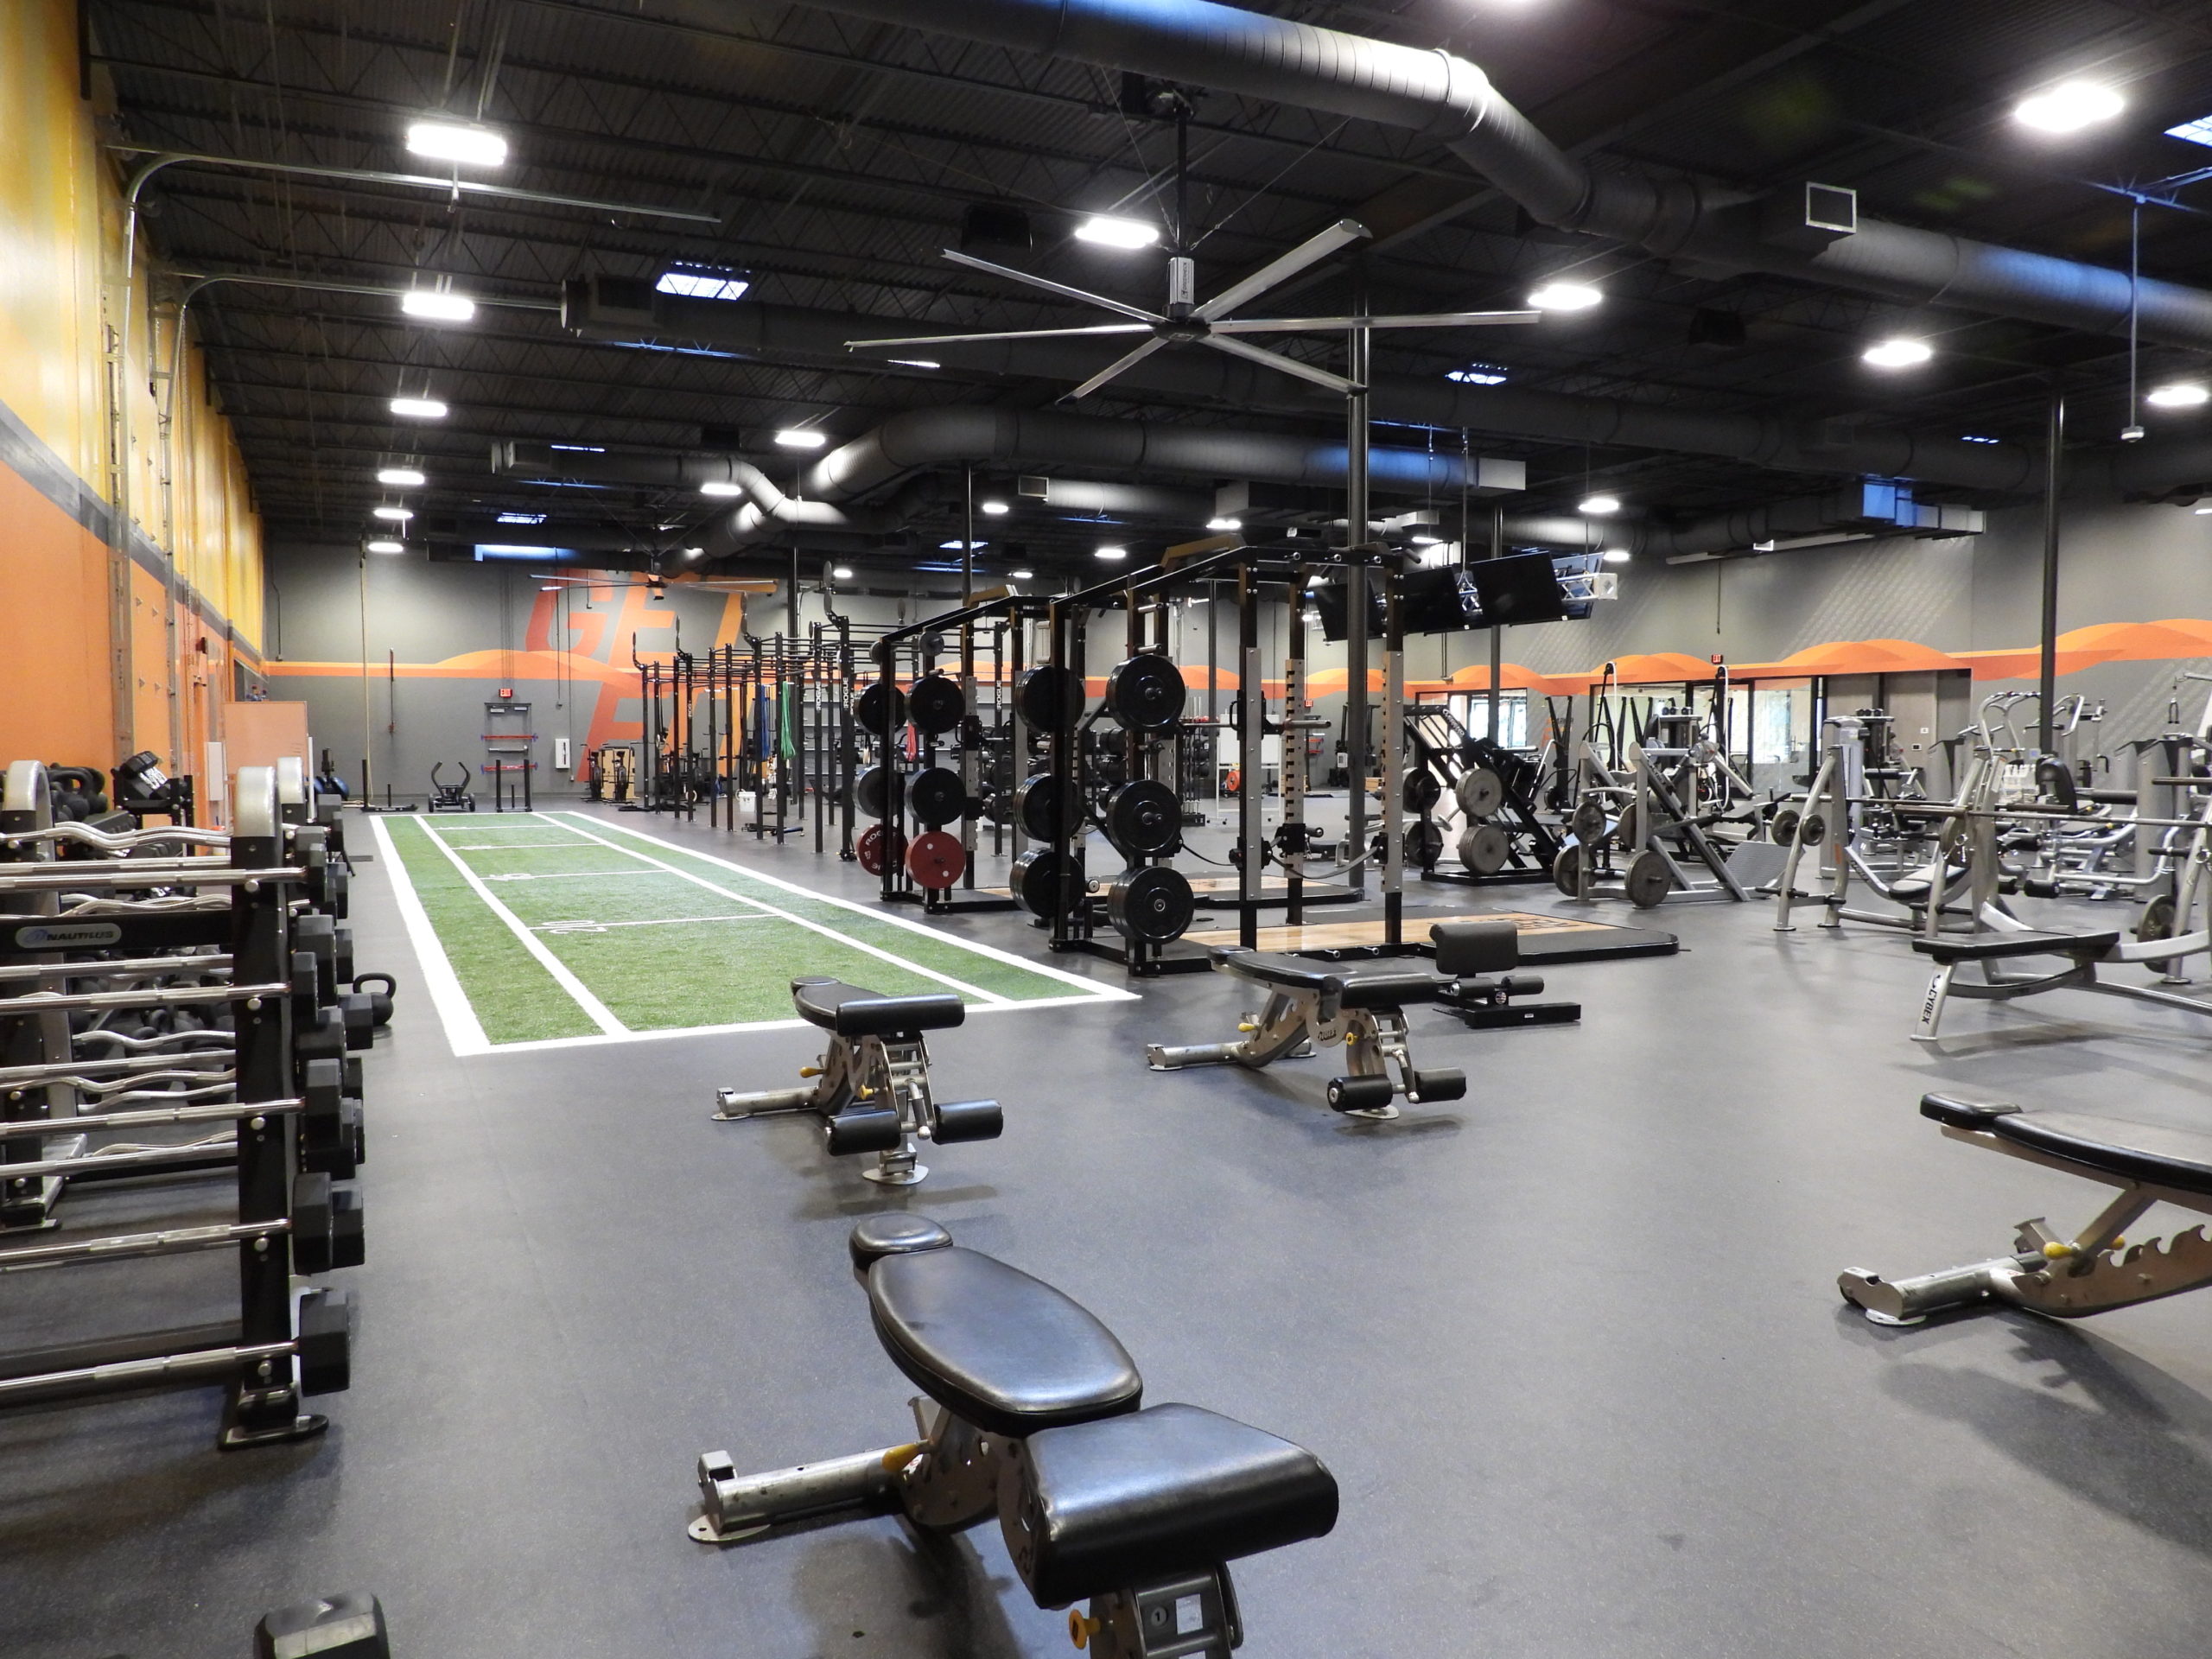 Interior photo of ParkerFit facility featuring workout equipment and a small synthetic grass field.